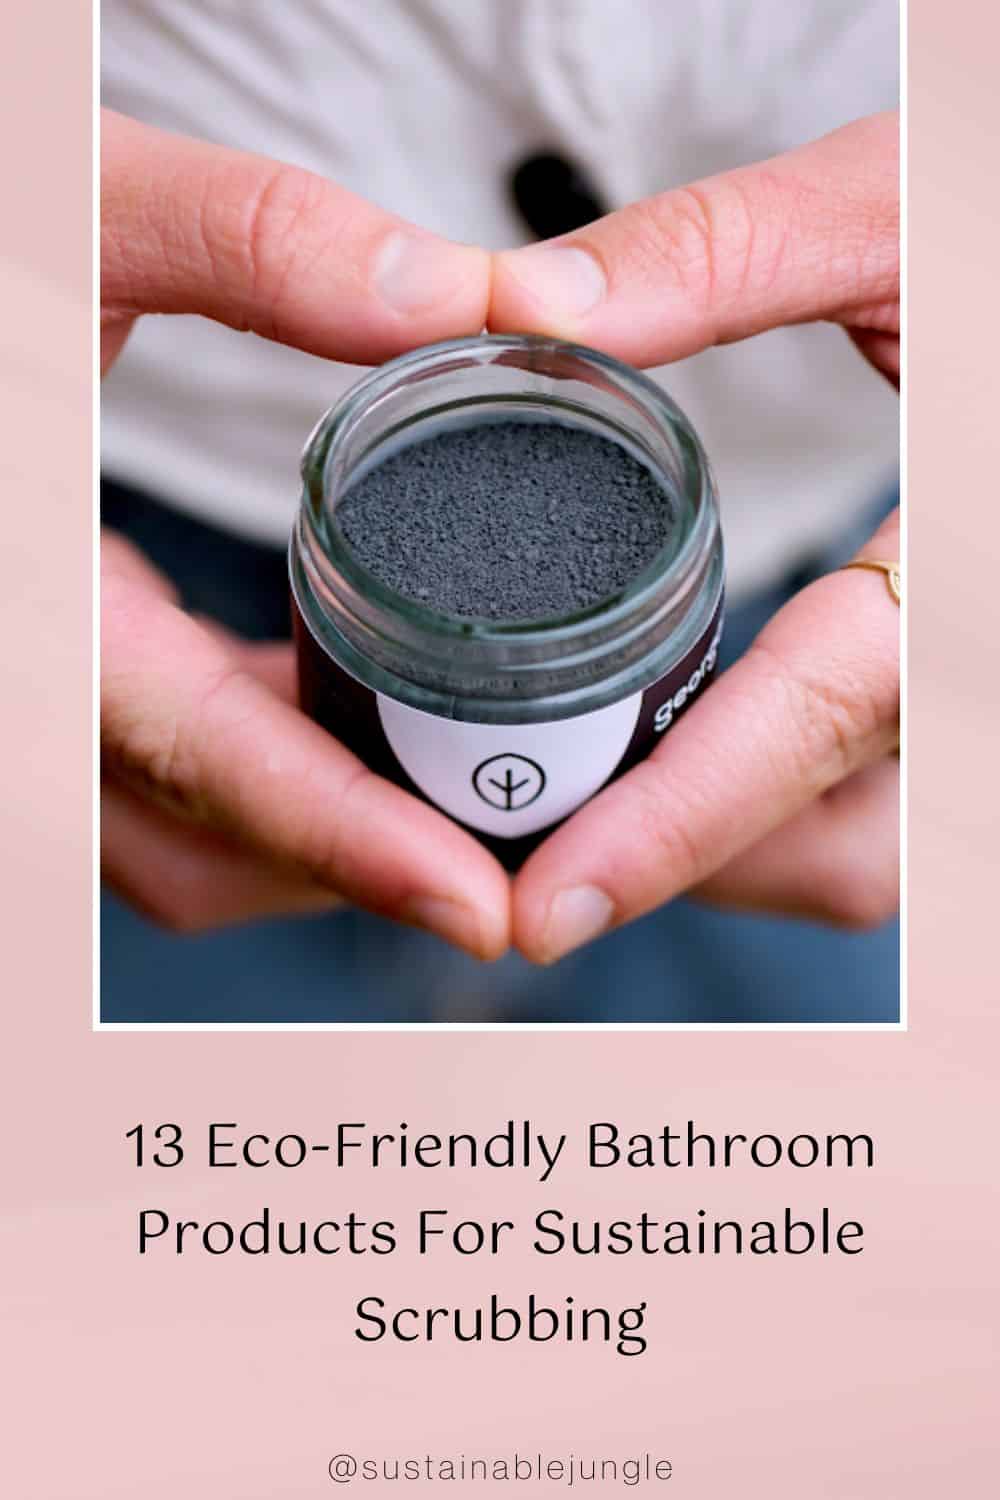 13 Eco-Friendly Bathroom Products For Sustainable Scrubbing Image by Georganics #ecofriendlybathroomproducts #ecofriendlyshowerproducts #ecofriendlybathproducts #sustainablebathroomproducts #sustainablebathproducts #sustainablejungle